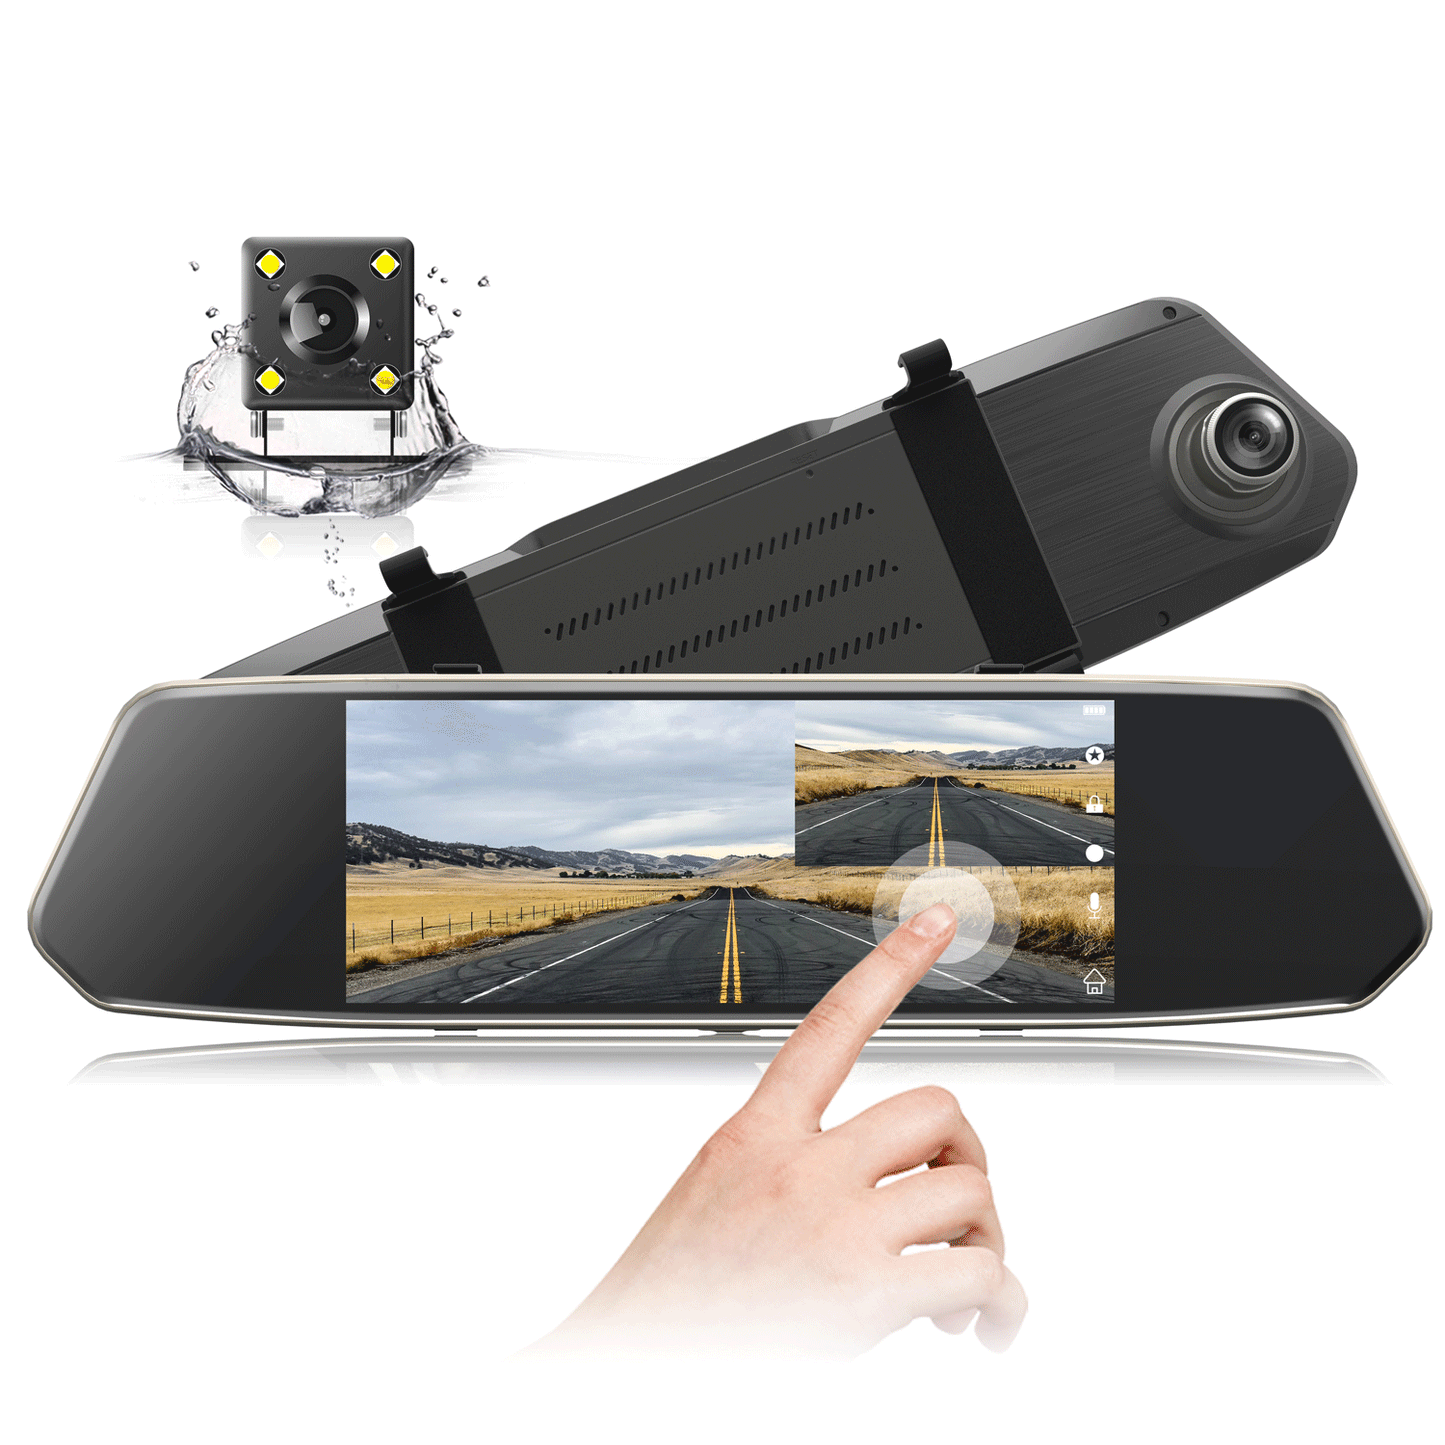 TOGUARD Mirror Dash Cam for Cars 7" 1080P Dual Lens IPS Touch Screen, Dash Cam Front and Rear View, Waterproof Backup Camera, 170°Wide Angle with G-Sensor Parking Monitor Motion Detection